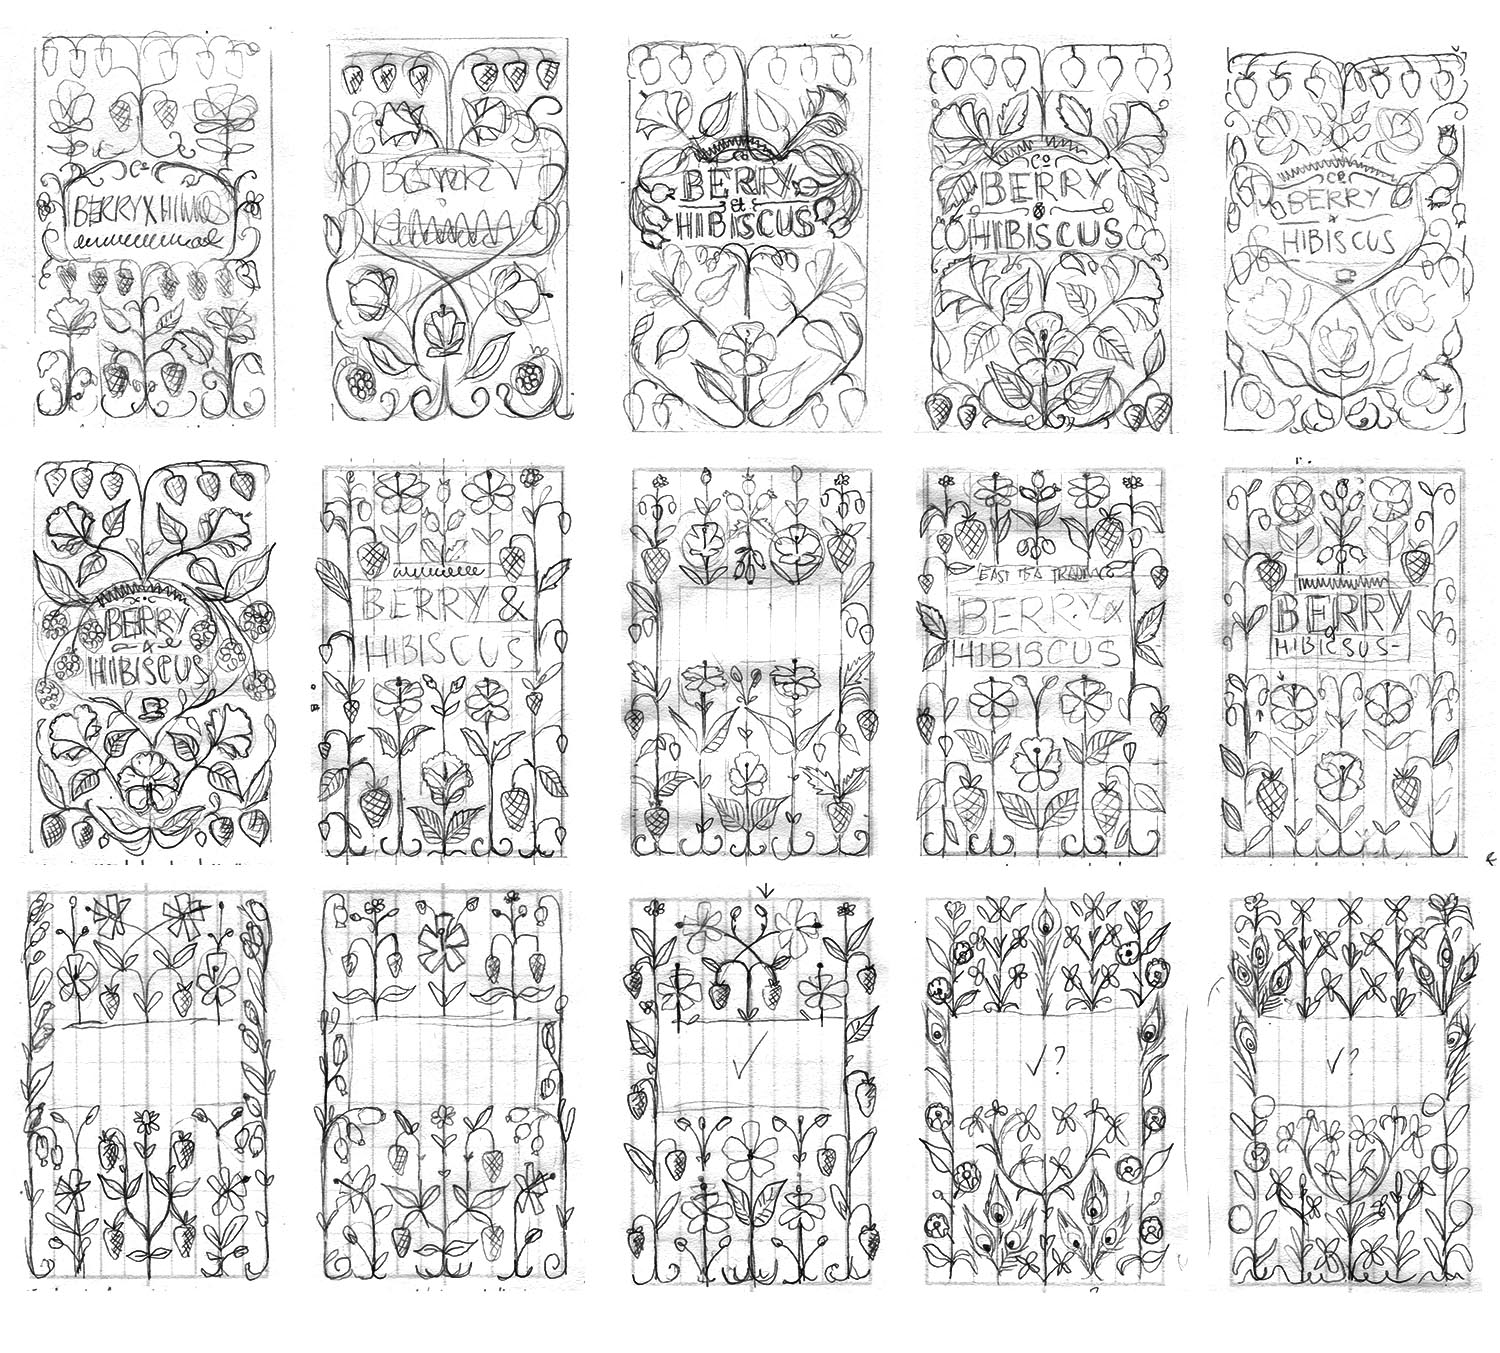 Tea Pattern Illustrations and Type Design featuring Span Font, Thumbnail sketches | Design by Jamie Clarke Type